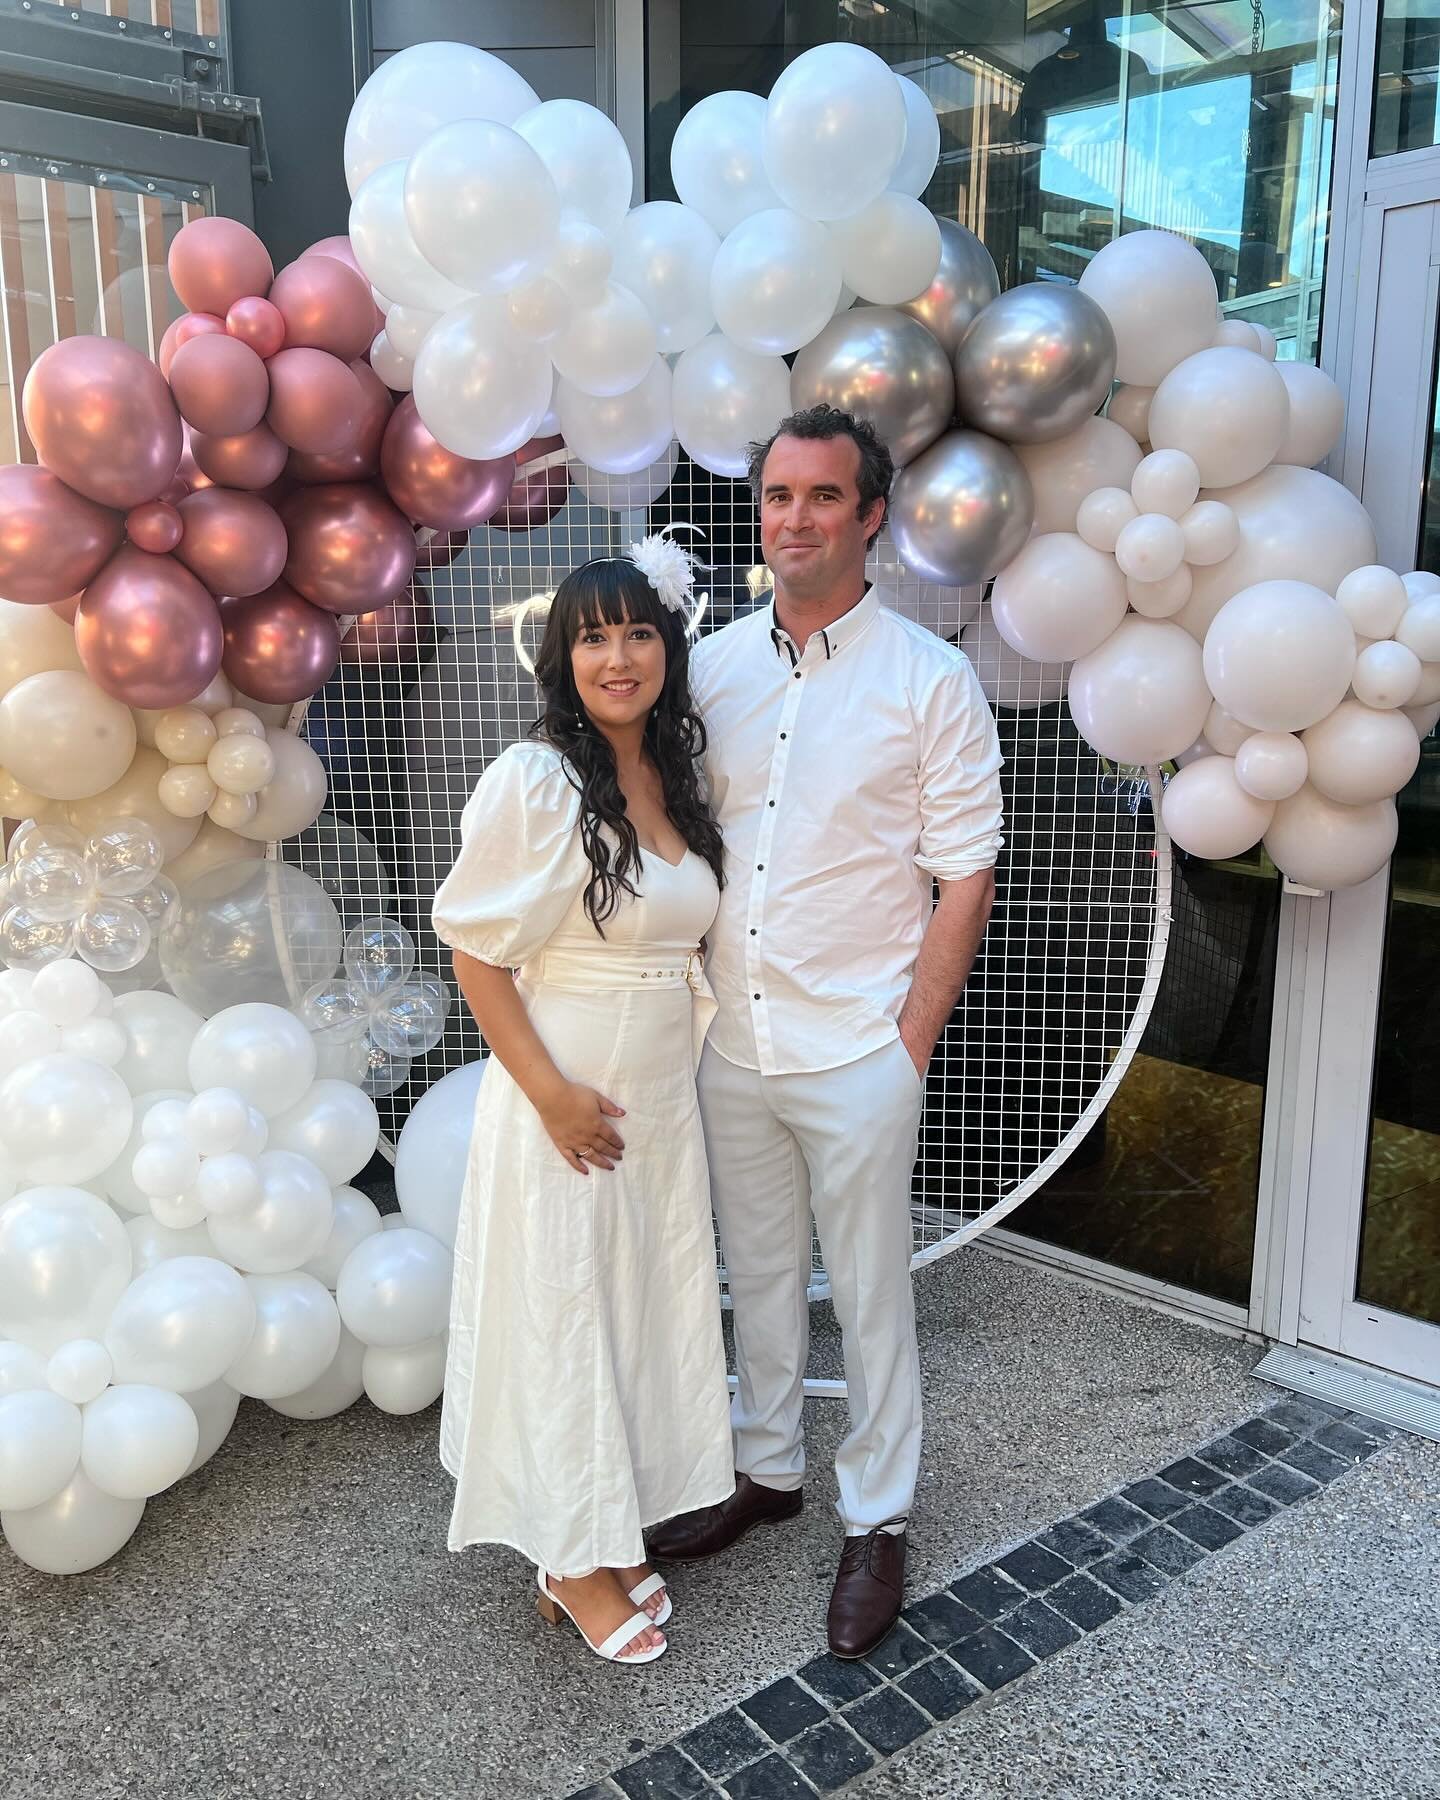 Photo of me and my fianc&eacute; at our Engagement Party 💍 🎈 Seems surreal to be planning my own wedding when I am so used to planning everyone else&rsquo;s 🥰